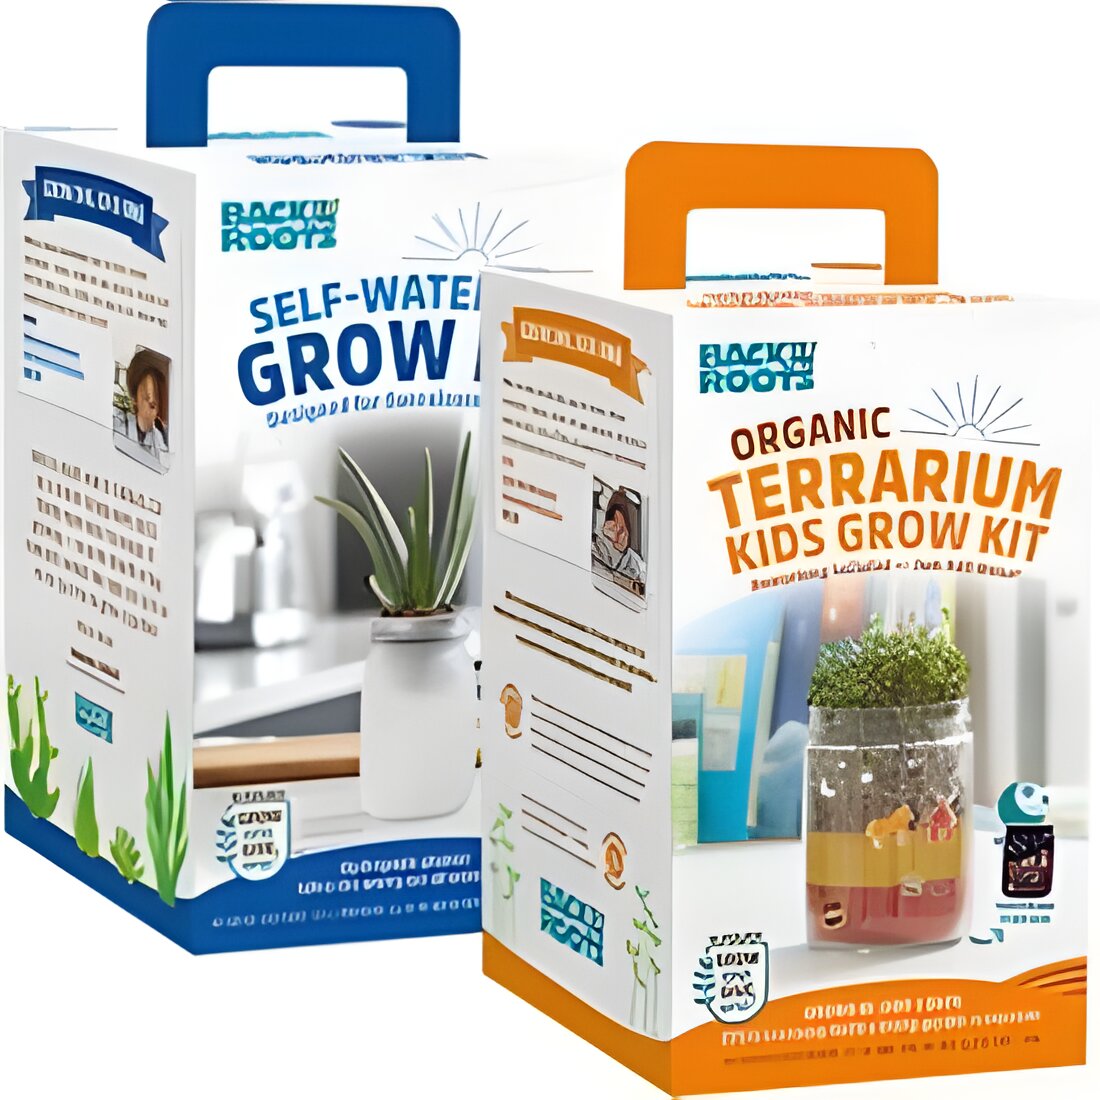 Free Back to the Roots Self-Watering Grow and Terrarium Grow Kits